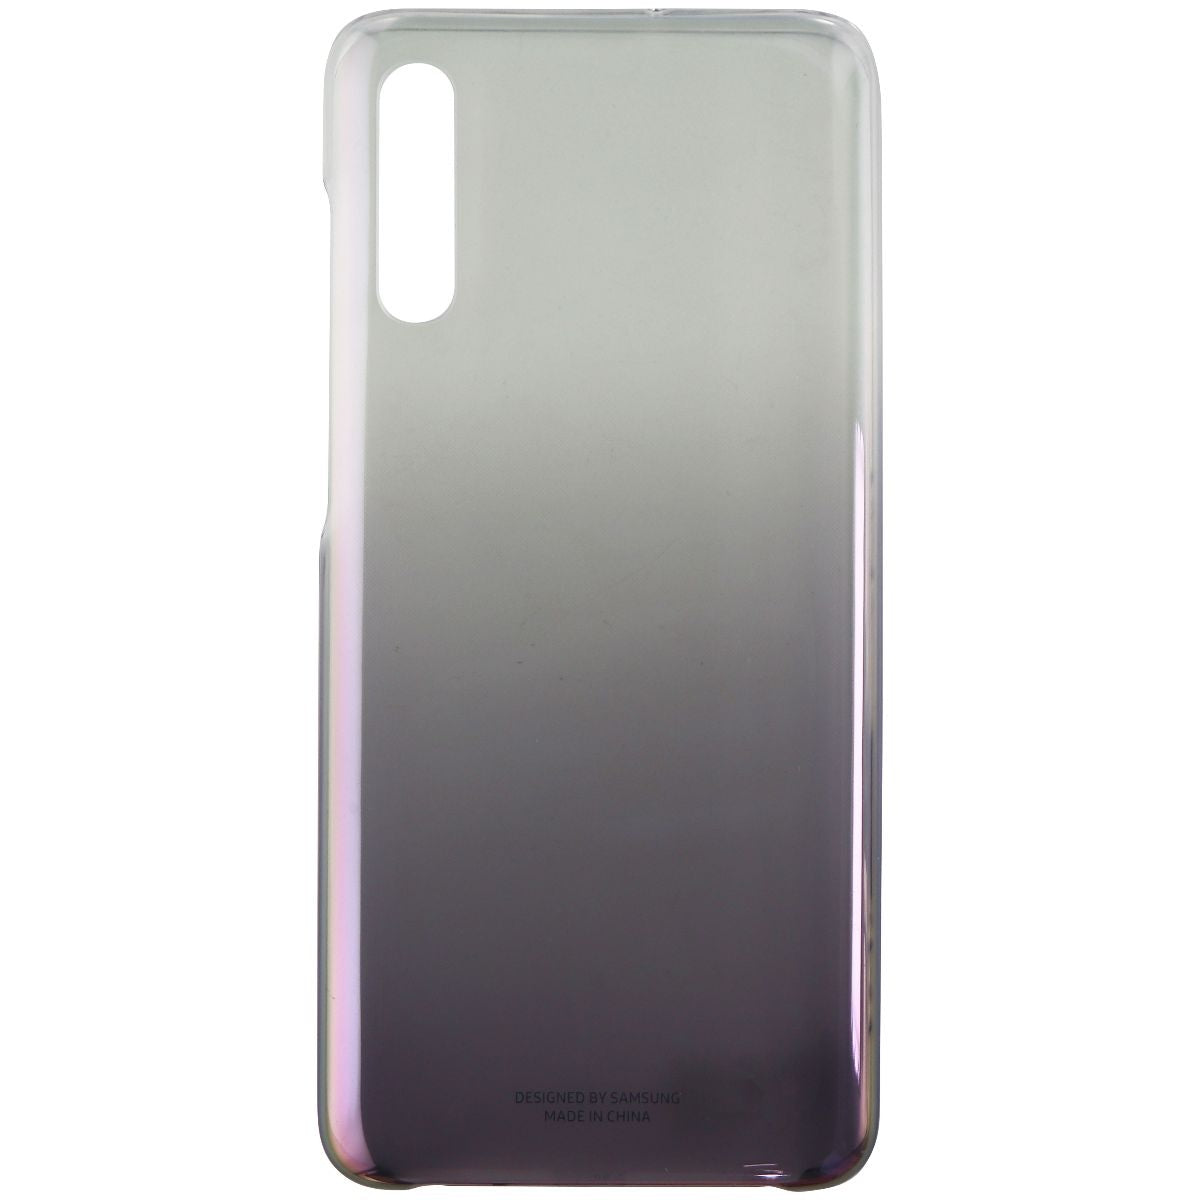 Samsung Gradation Ultra-Thin Cover Case for Samsung Galaxy A50 - Gradient Violet Cell Phone - Cases, Covers & Skins Samsung    - Simple Cell Bulk Wholesale Pricing - USA Seller